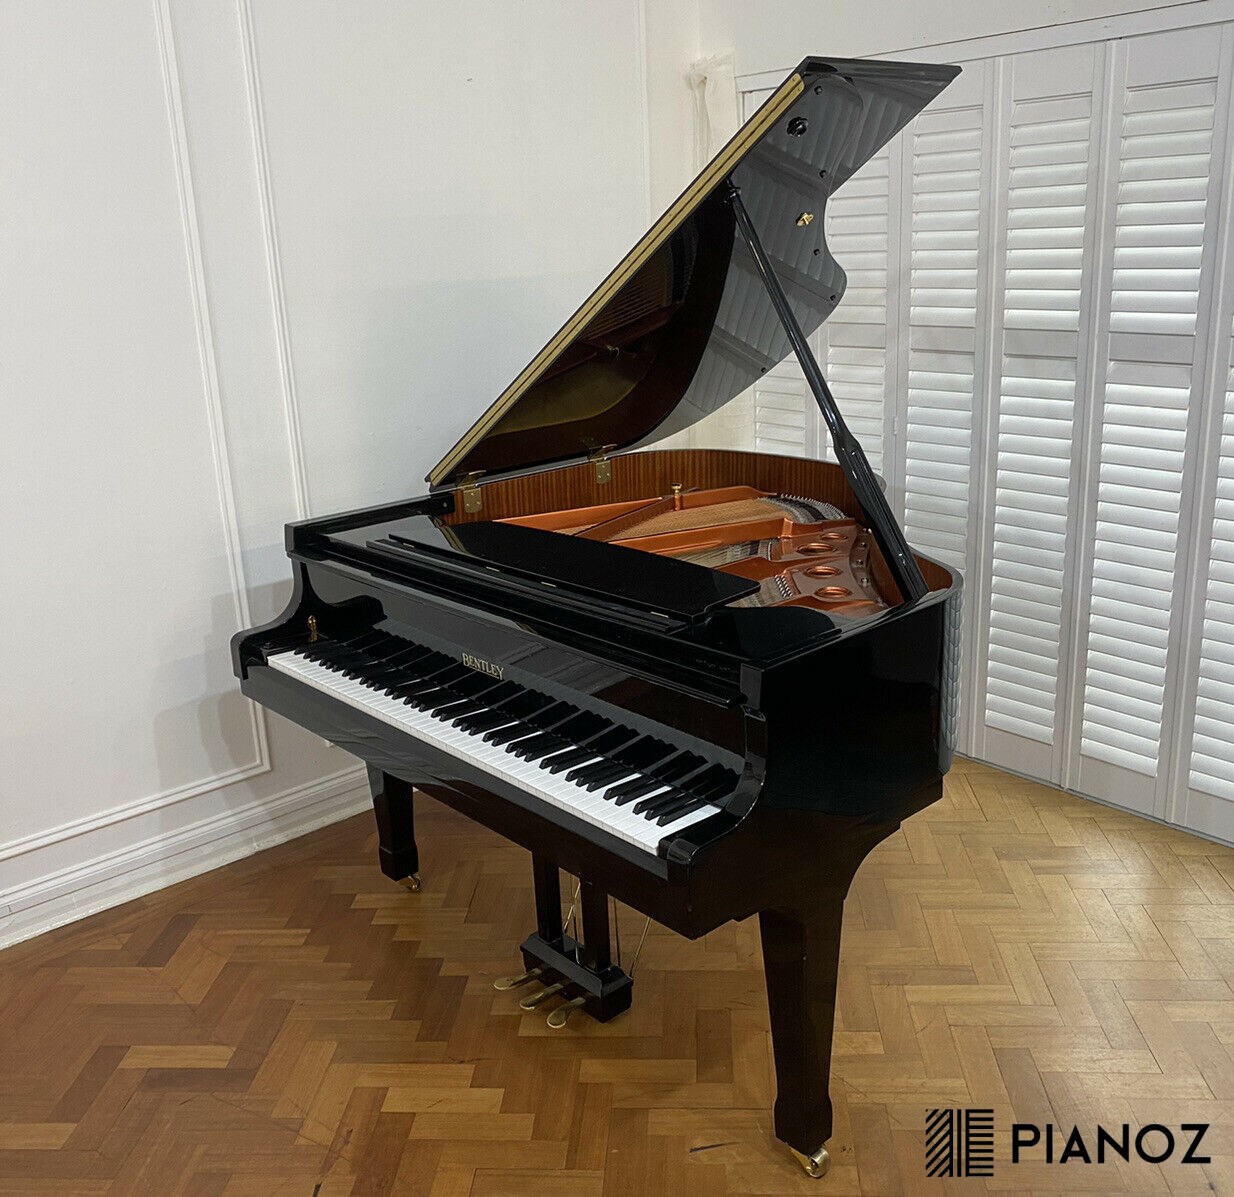 Bentley 150 Baby Grand Piano piano for sale in UK